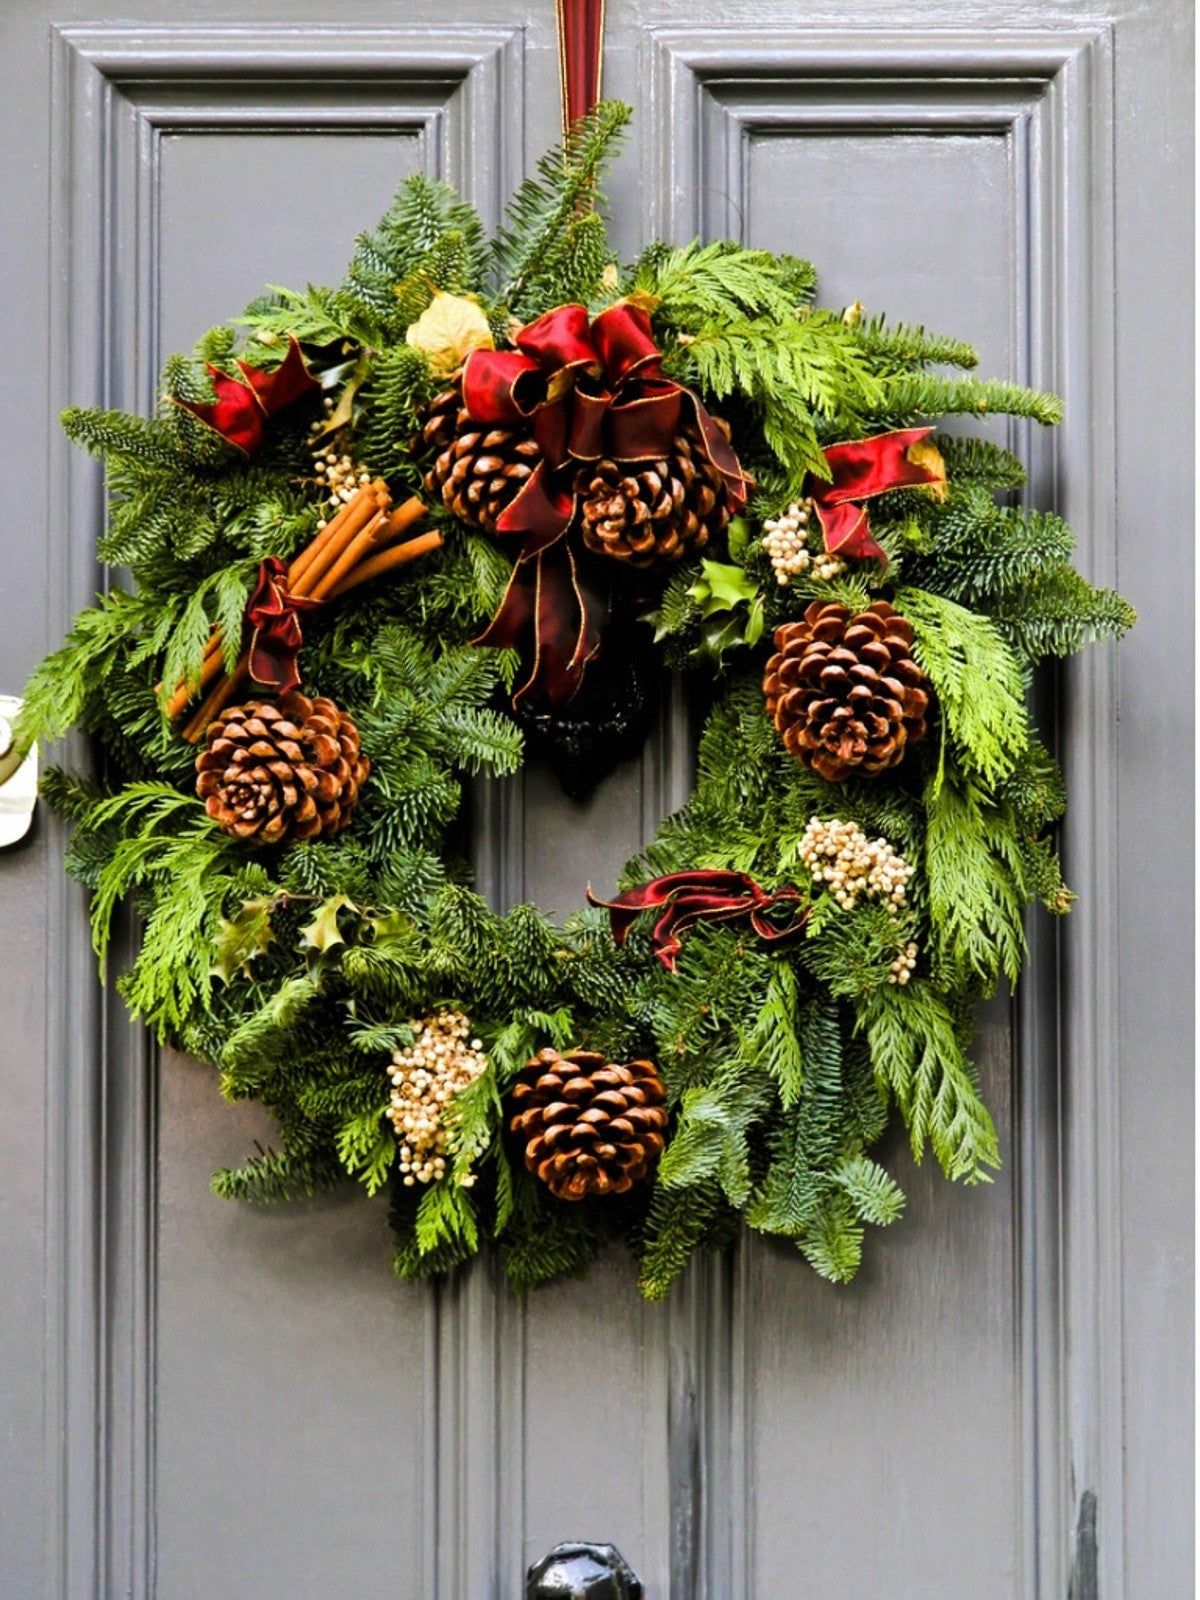 Spruce Up A Plain Evergreen Wreath - Decorate With Foraged Materials ...